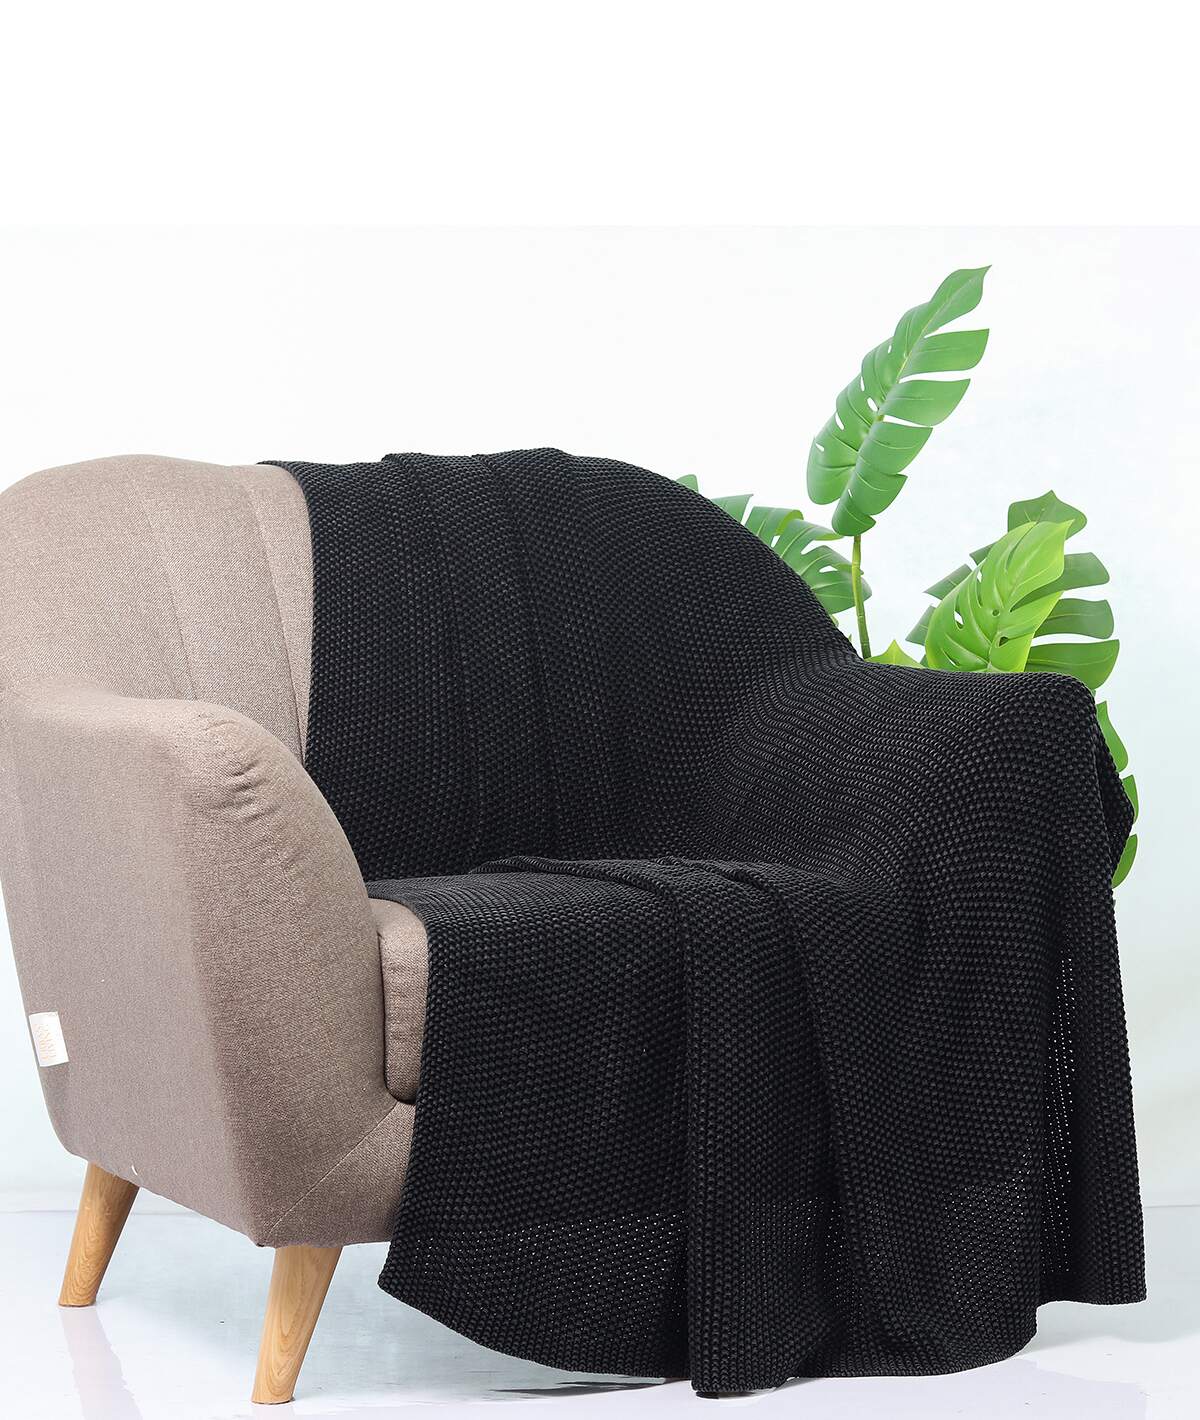 Knitted Purl Black Color Cotton Knitted Throw/Blanket For Round The Year Use